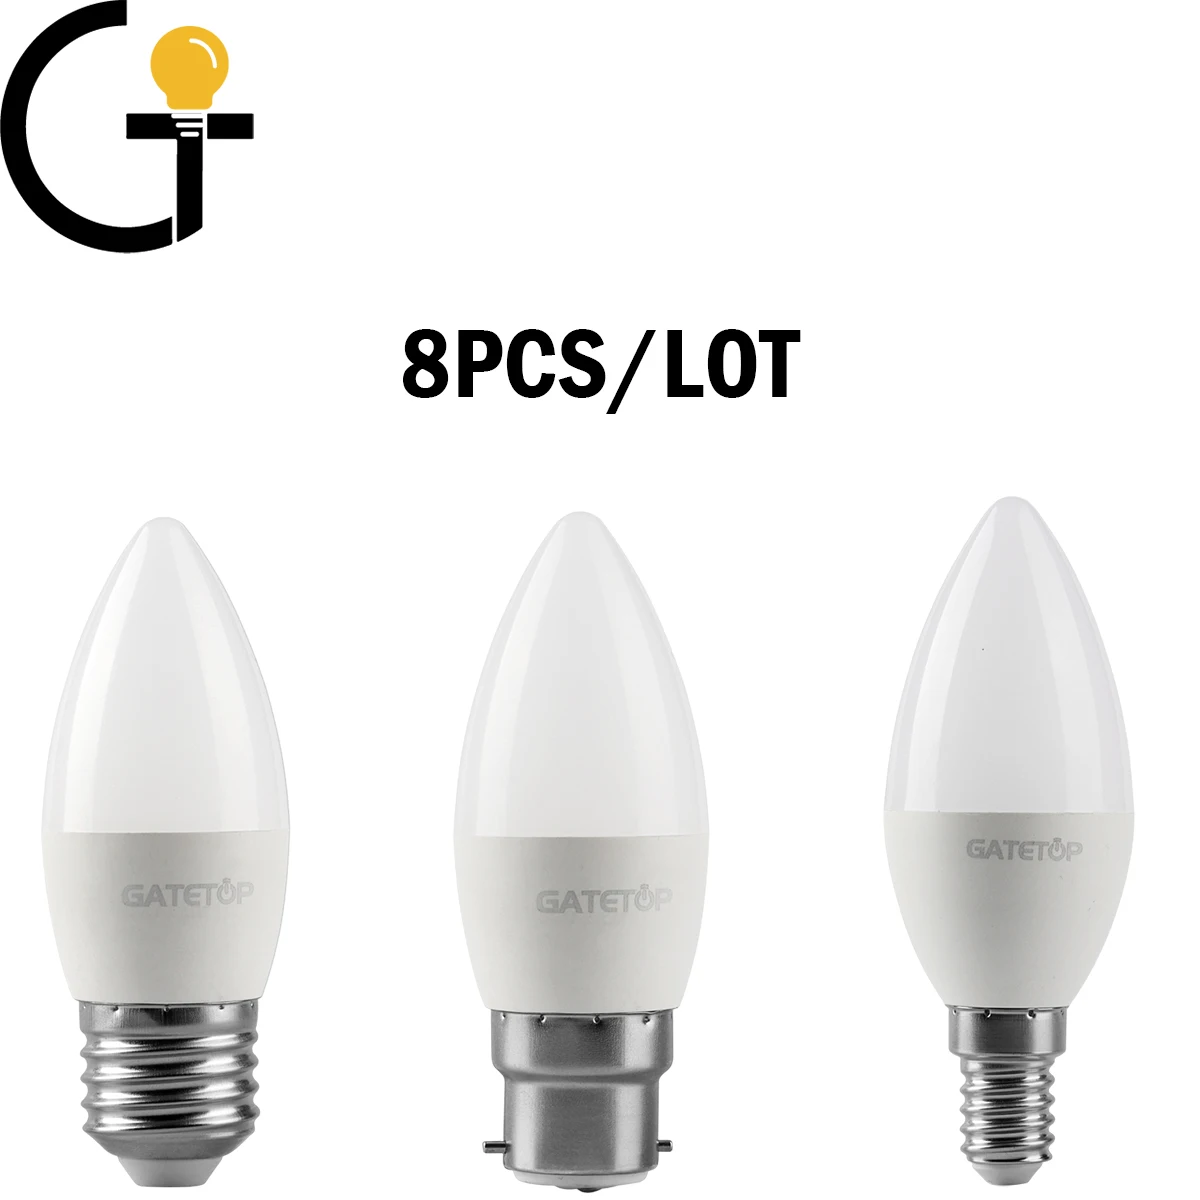 

8Pcs 220V Led Bulb C37 3W-7W E27 B22 E14 Warm White Day White Cold White Lamp For Home Decoration